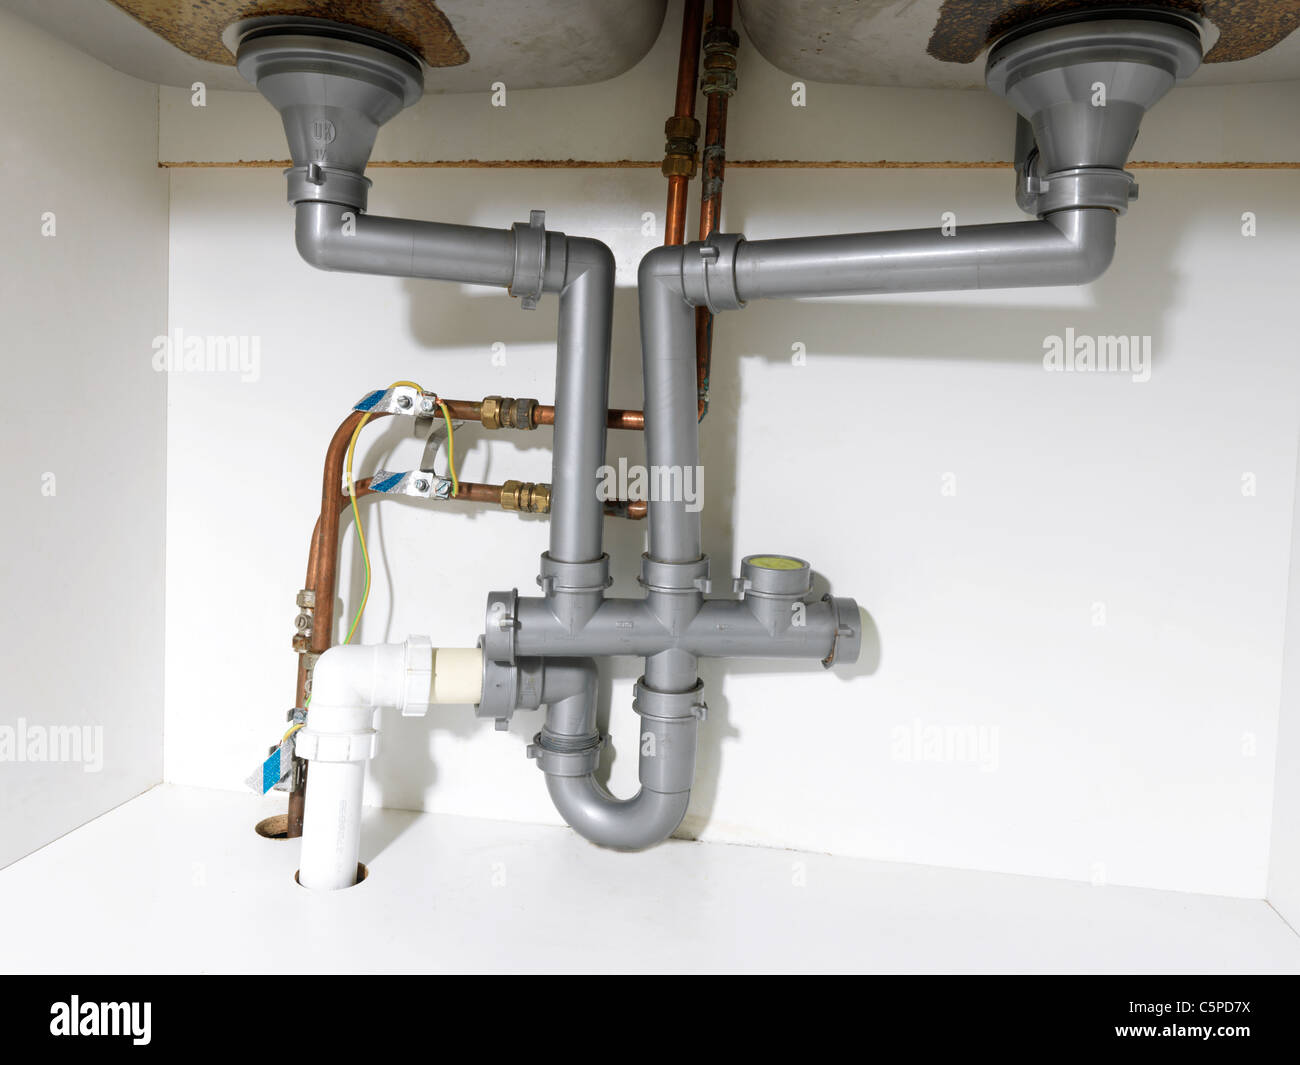 Waste Pipe And Fittings Under A Double Kitchen Sink And